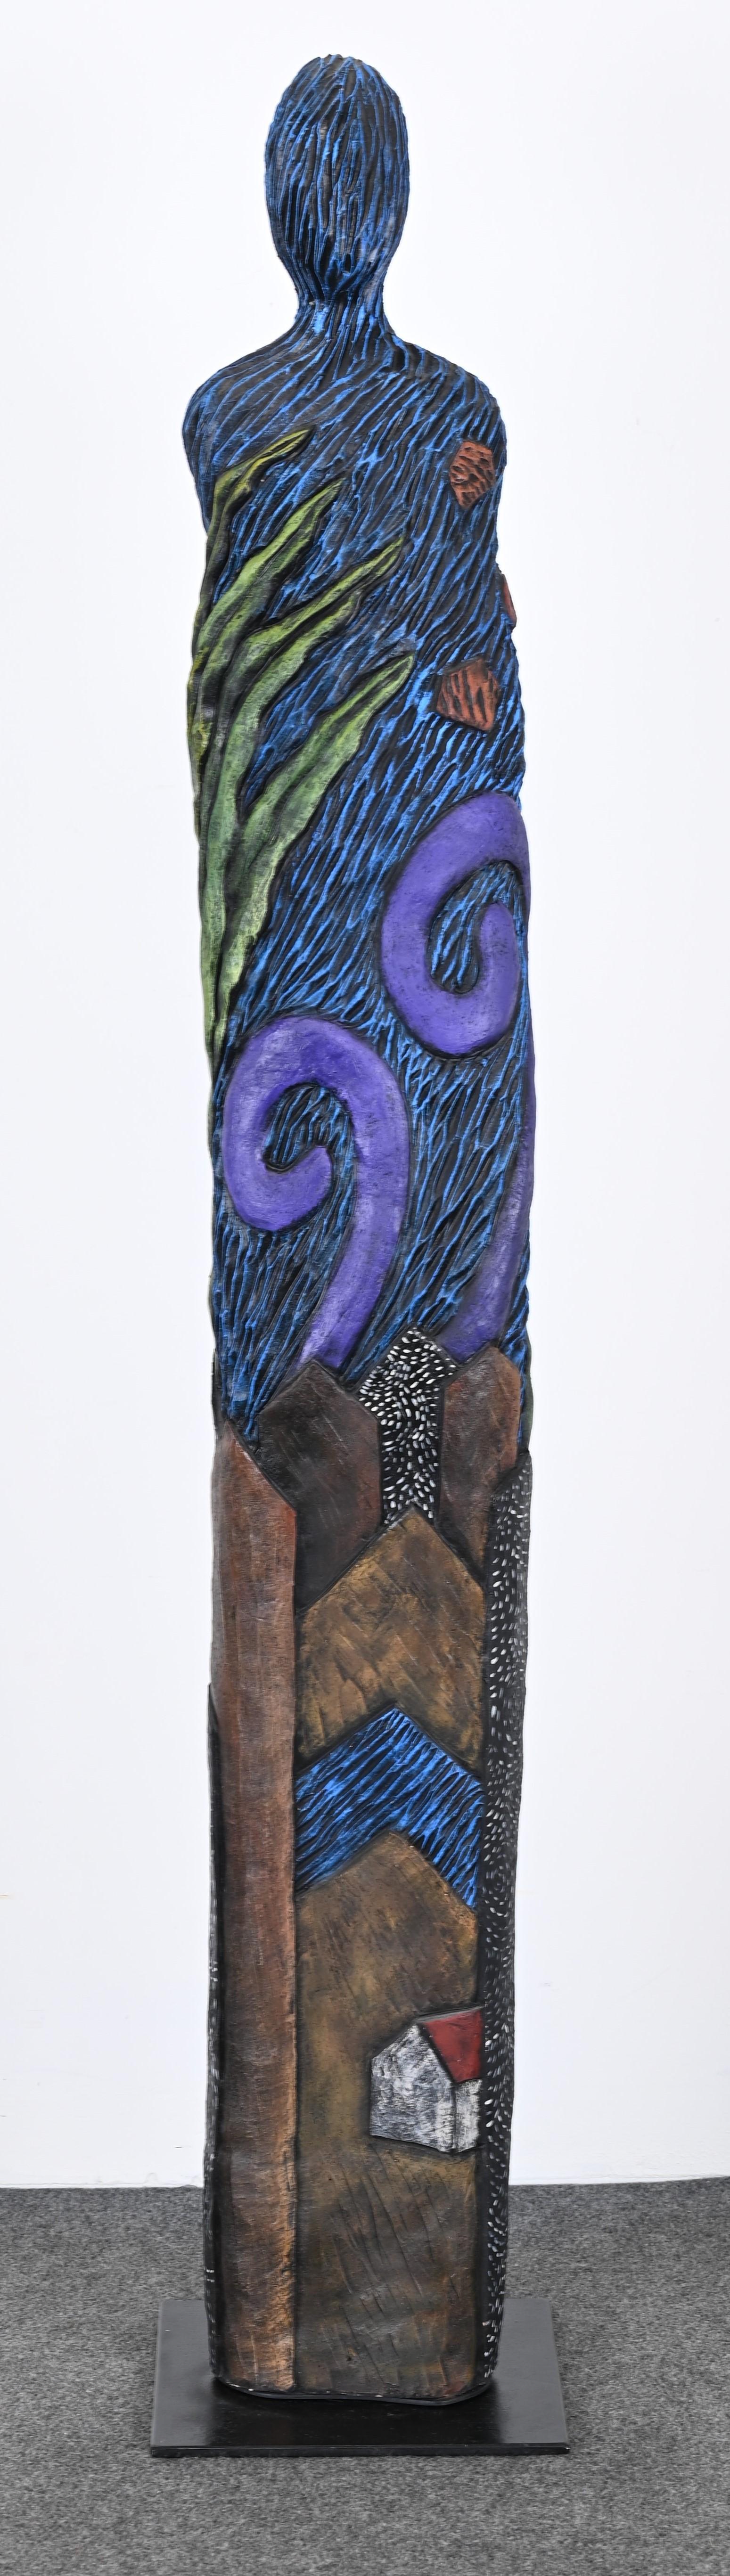 Post-Modern Stoneware TOTEM or Sculpture by Christine Federighi, 1997